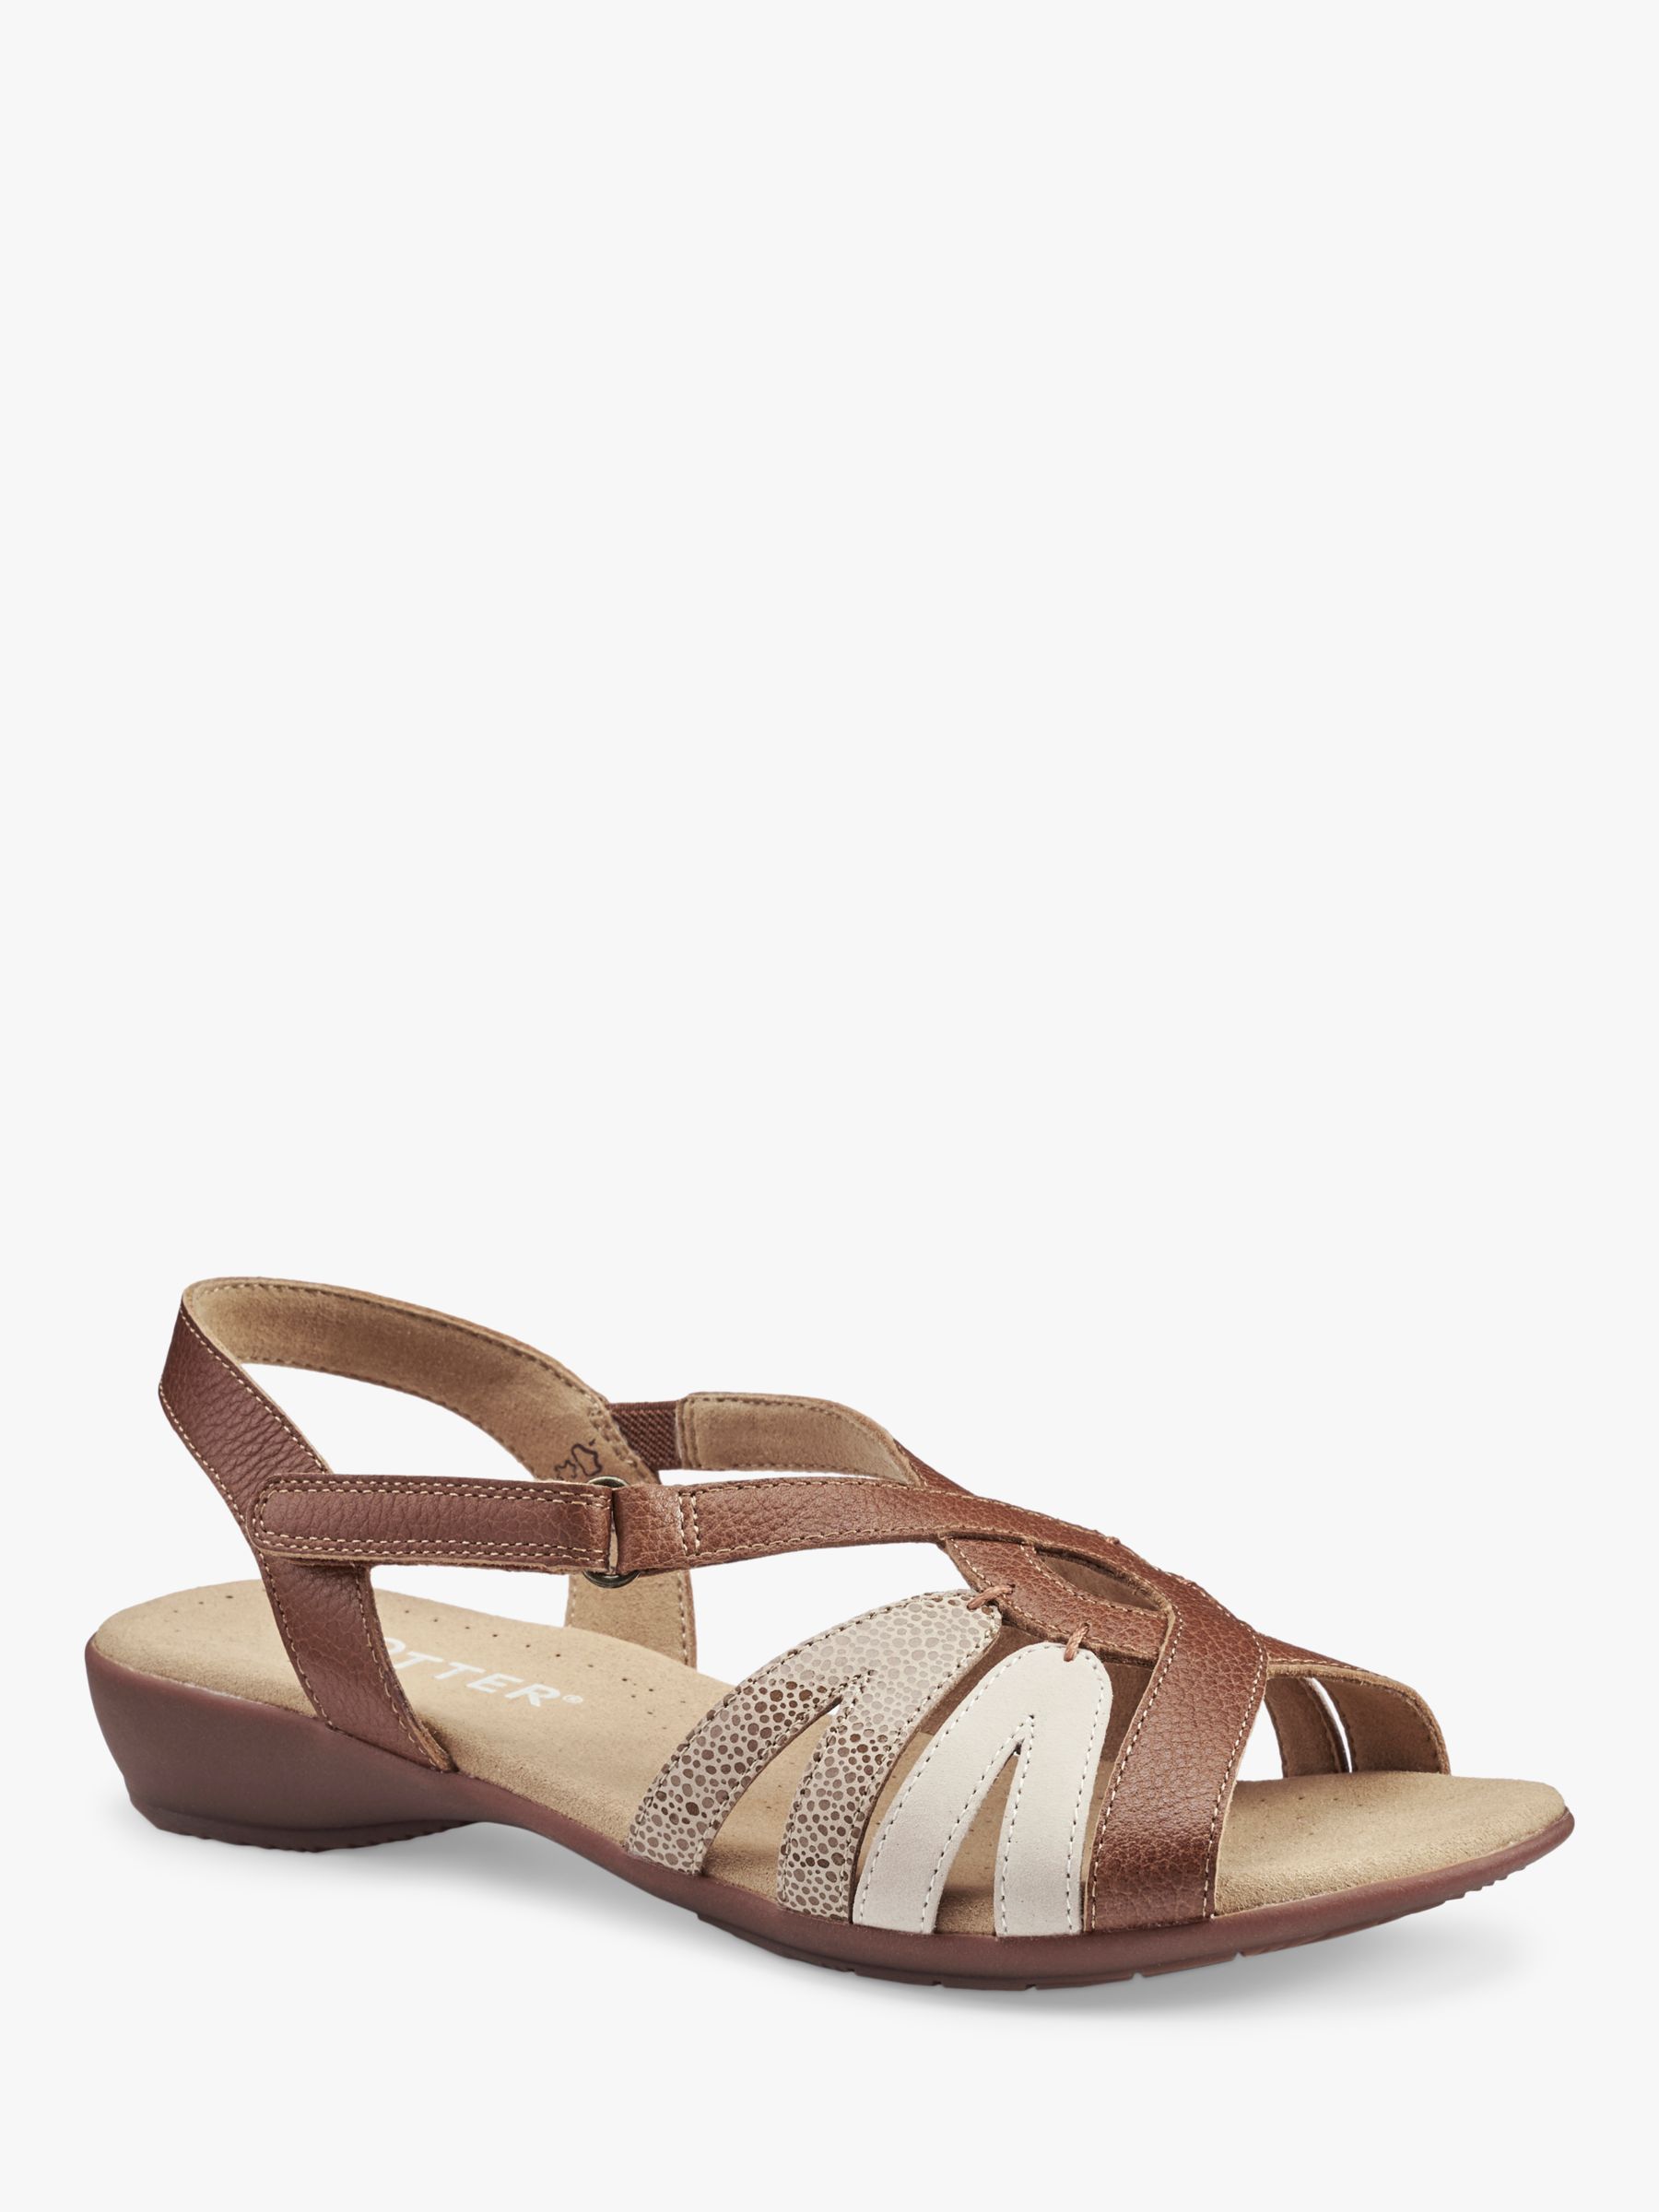 Buy Hotter Flare Wide Fit Faux Reptile Leather and Nubuck Gladiator Sandals, Rich Tan Online at johnlewis.com